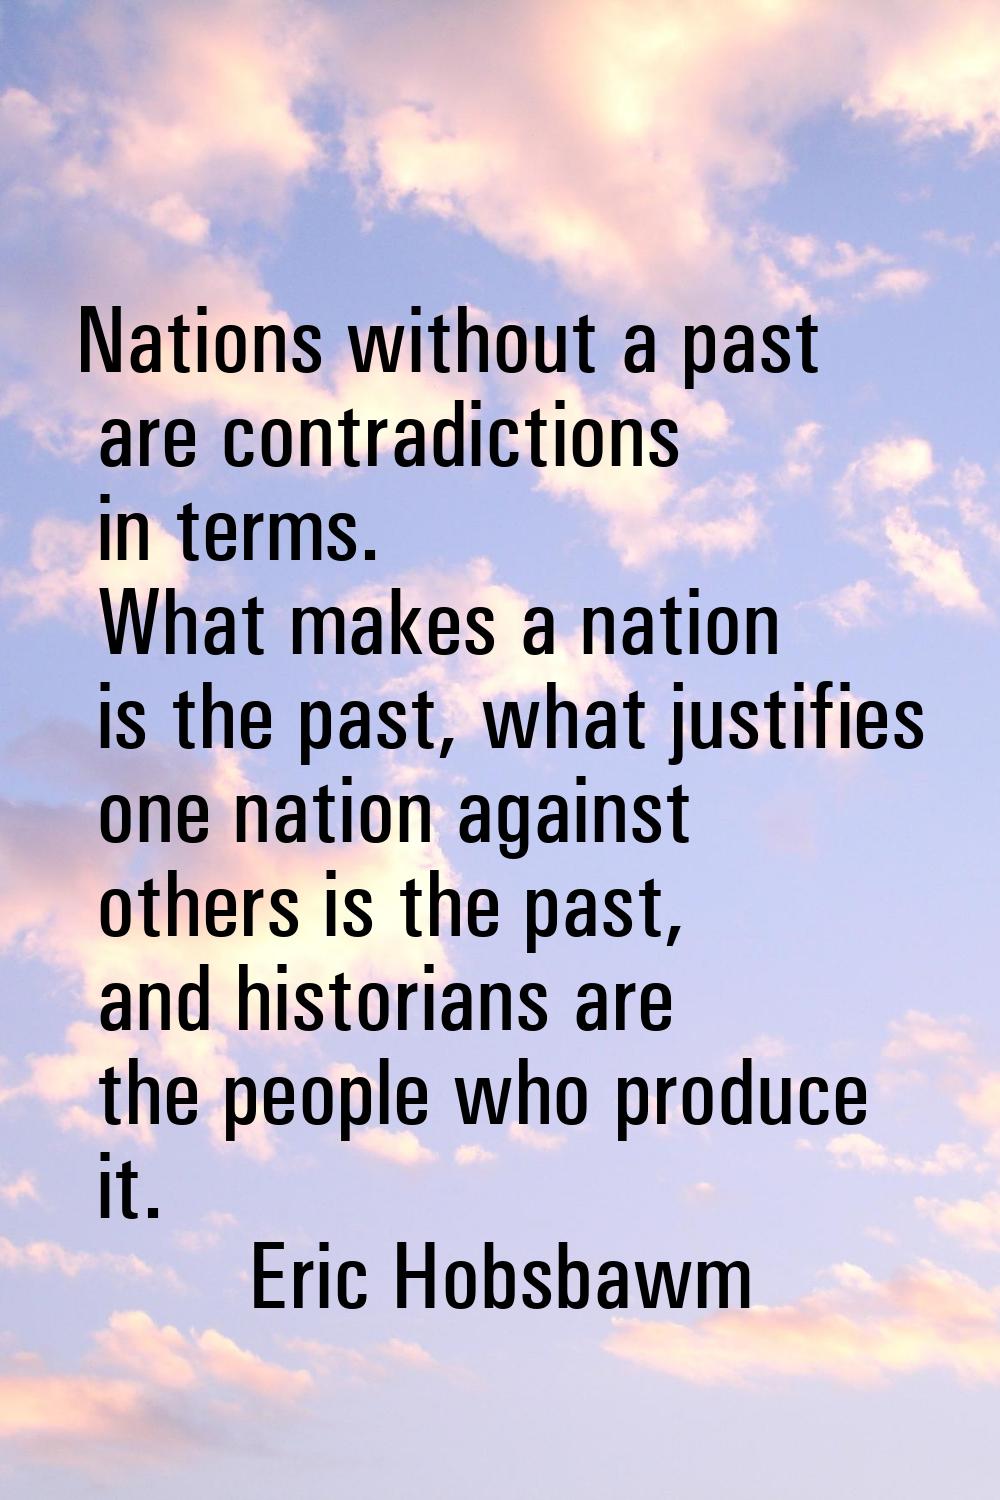 Nations without a past are contradictions in terms. What makes a nation is the past, what justifies